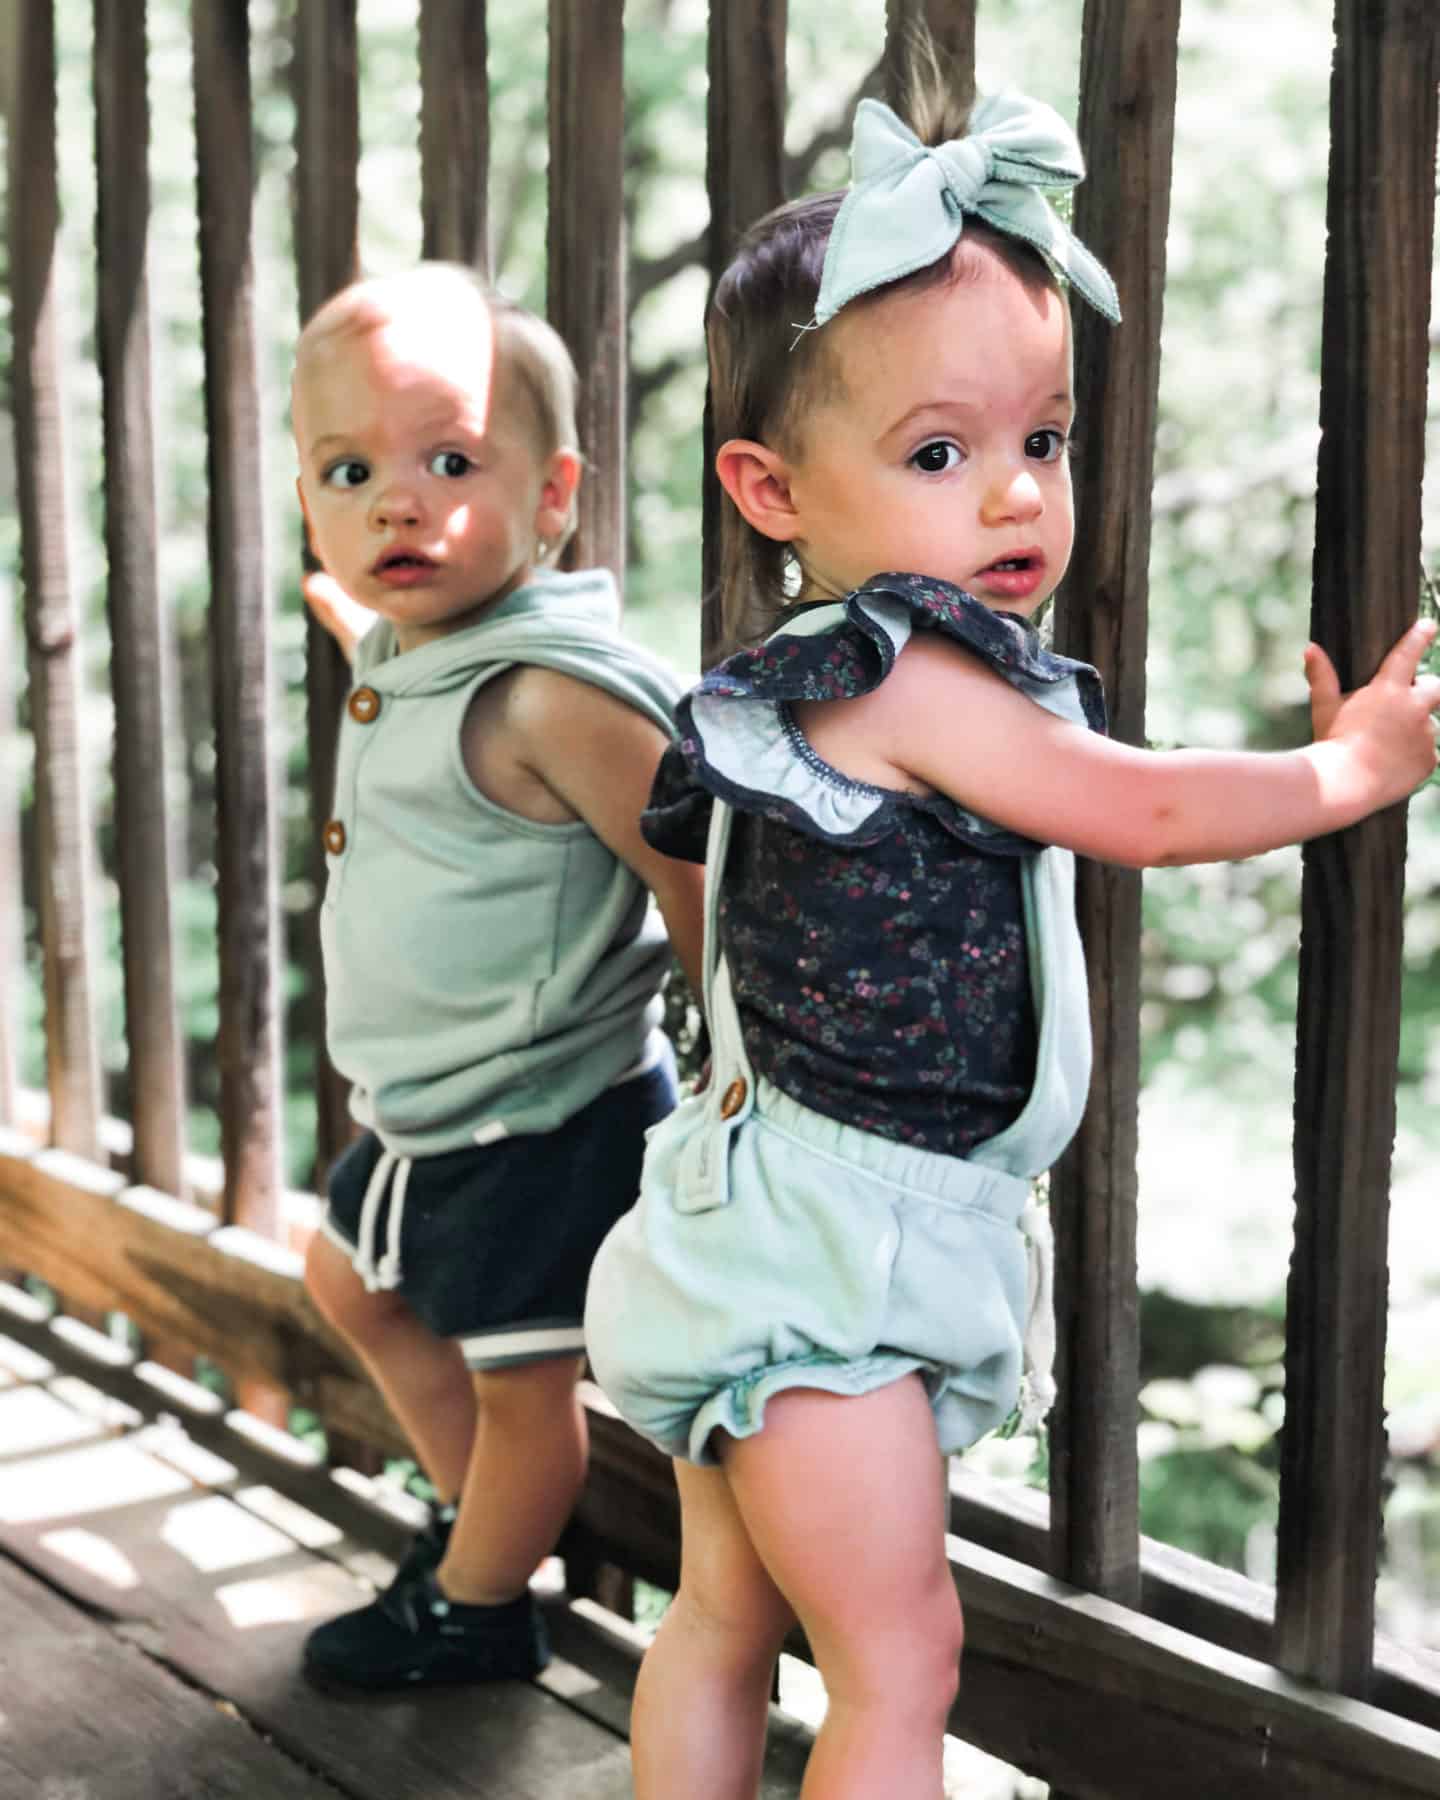 shopping with twins, boy and girl in mint and navy blue outfits standing on bridge